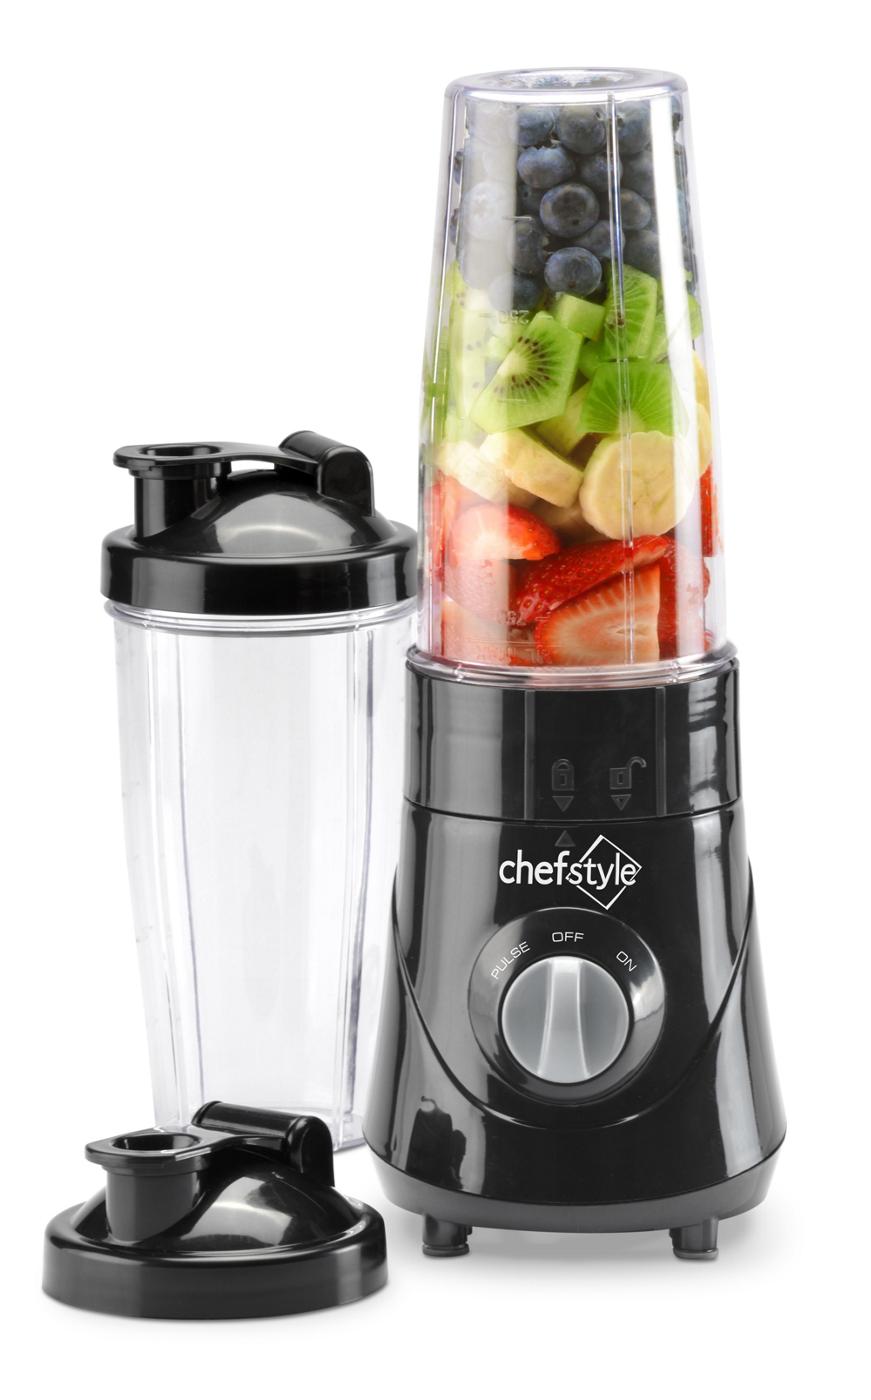 chefstyle Personal Blender - Black; image 3 of 3